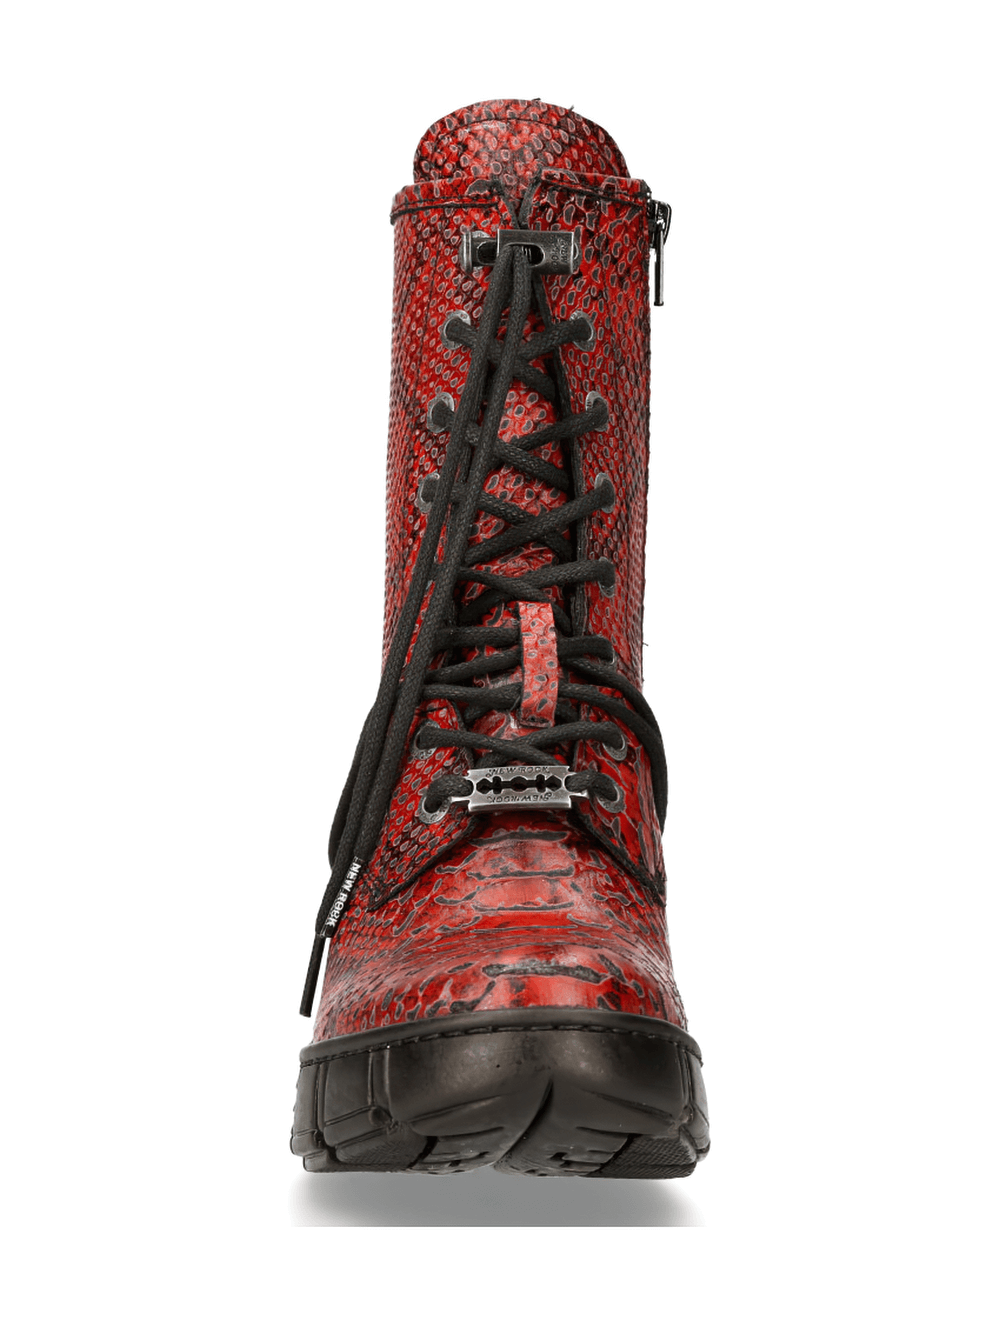 NEW ROCK Gothic Edgy Red Reptile Print Ankle Boots